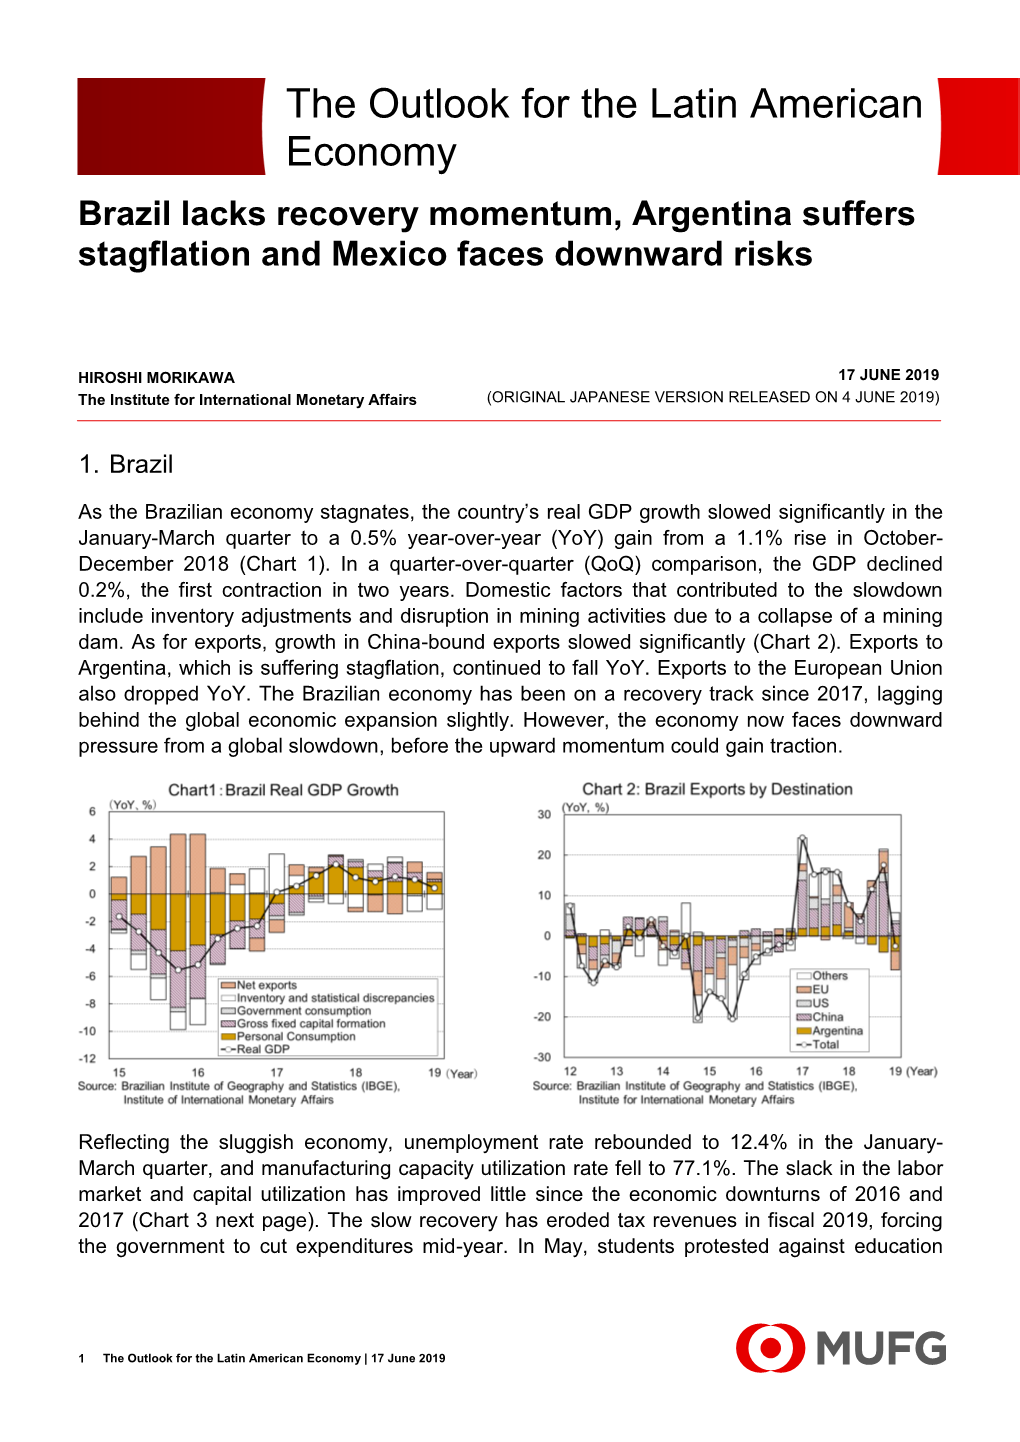 The Outlook for the Latin American Economy Brazil Lacks Recovery Momentum, Argentina Suffers Stagflation and Mexico Faces Downward Risks